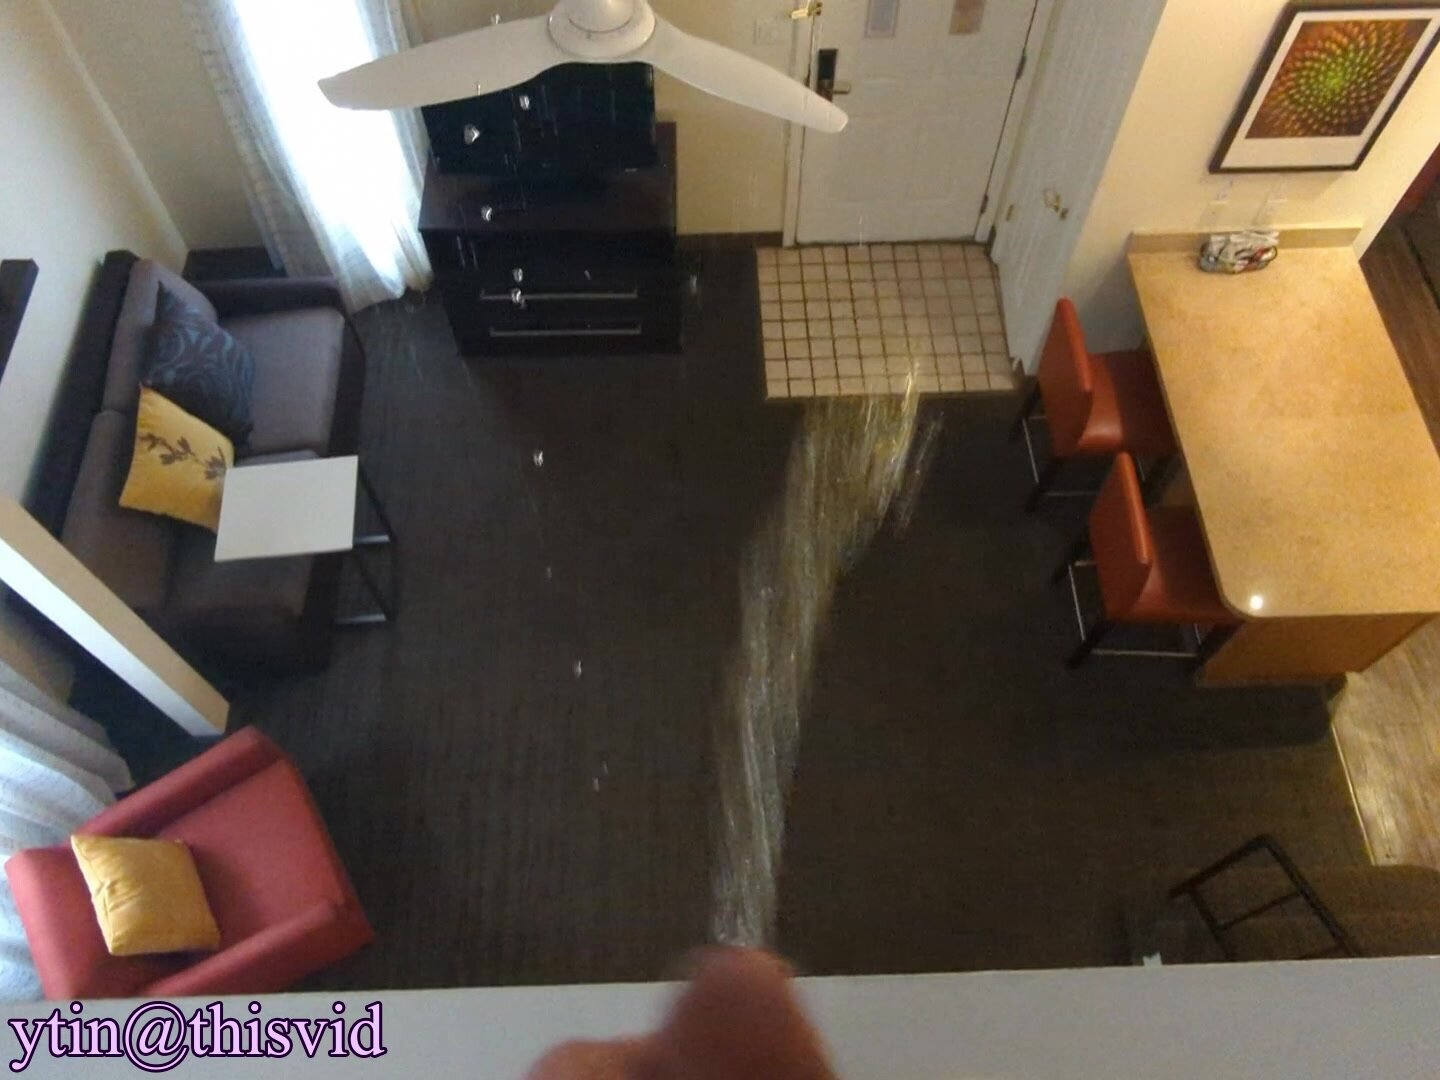 Hotel Piss From Loft on Floor, Ceiling, and TV image